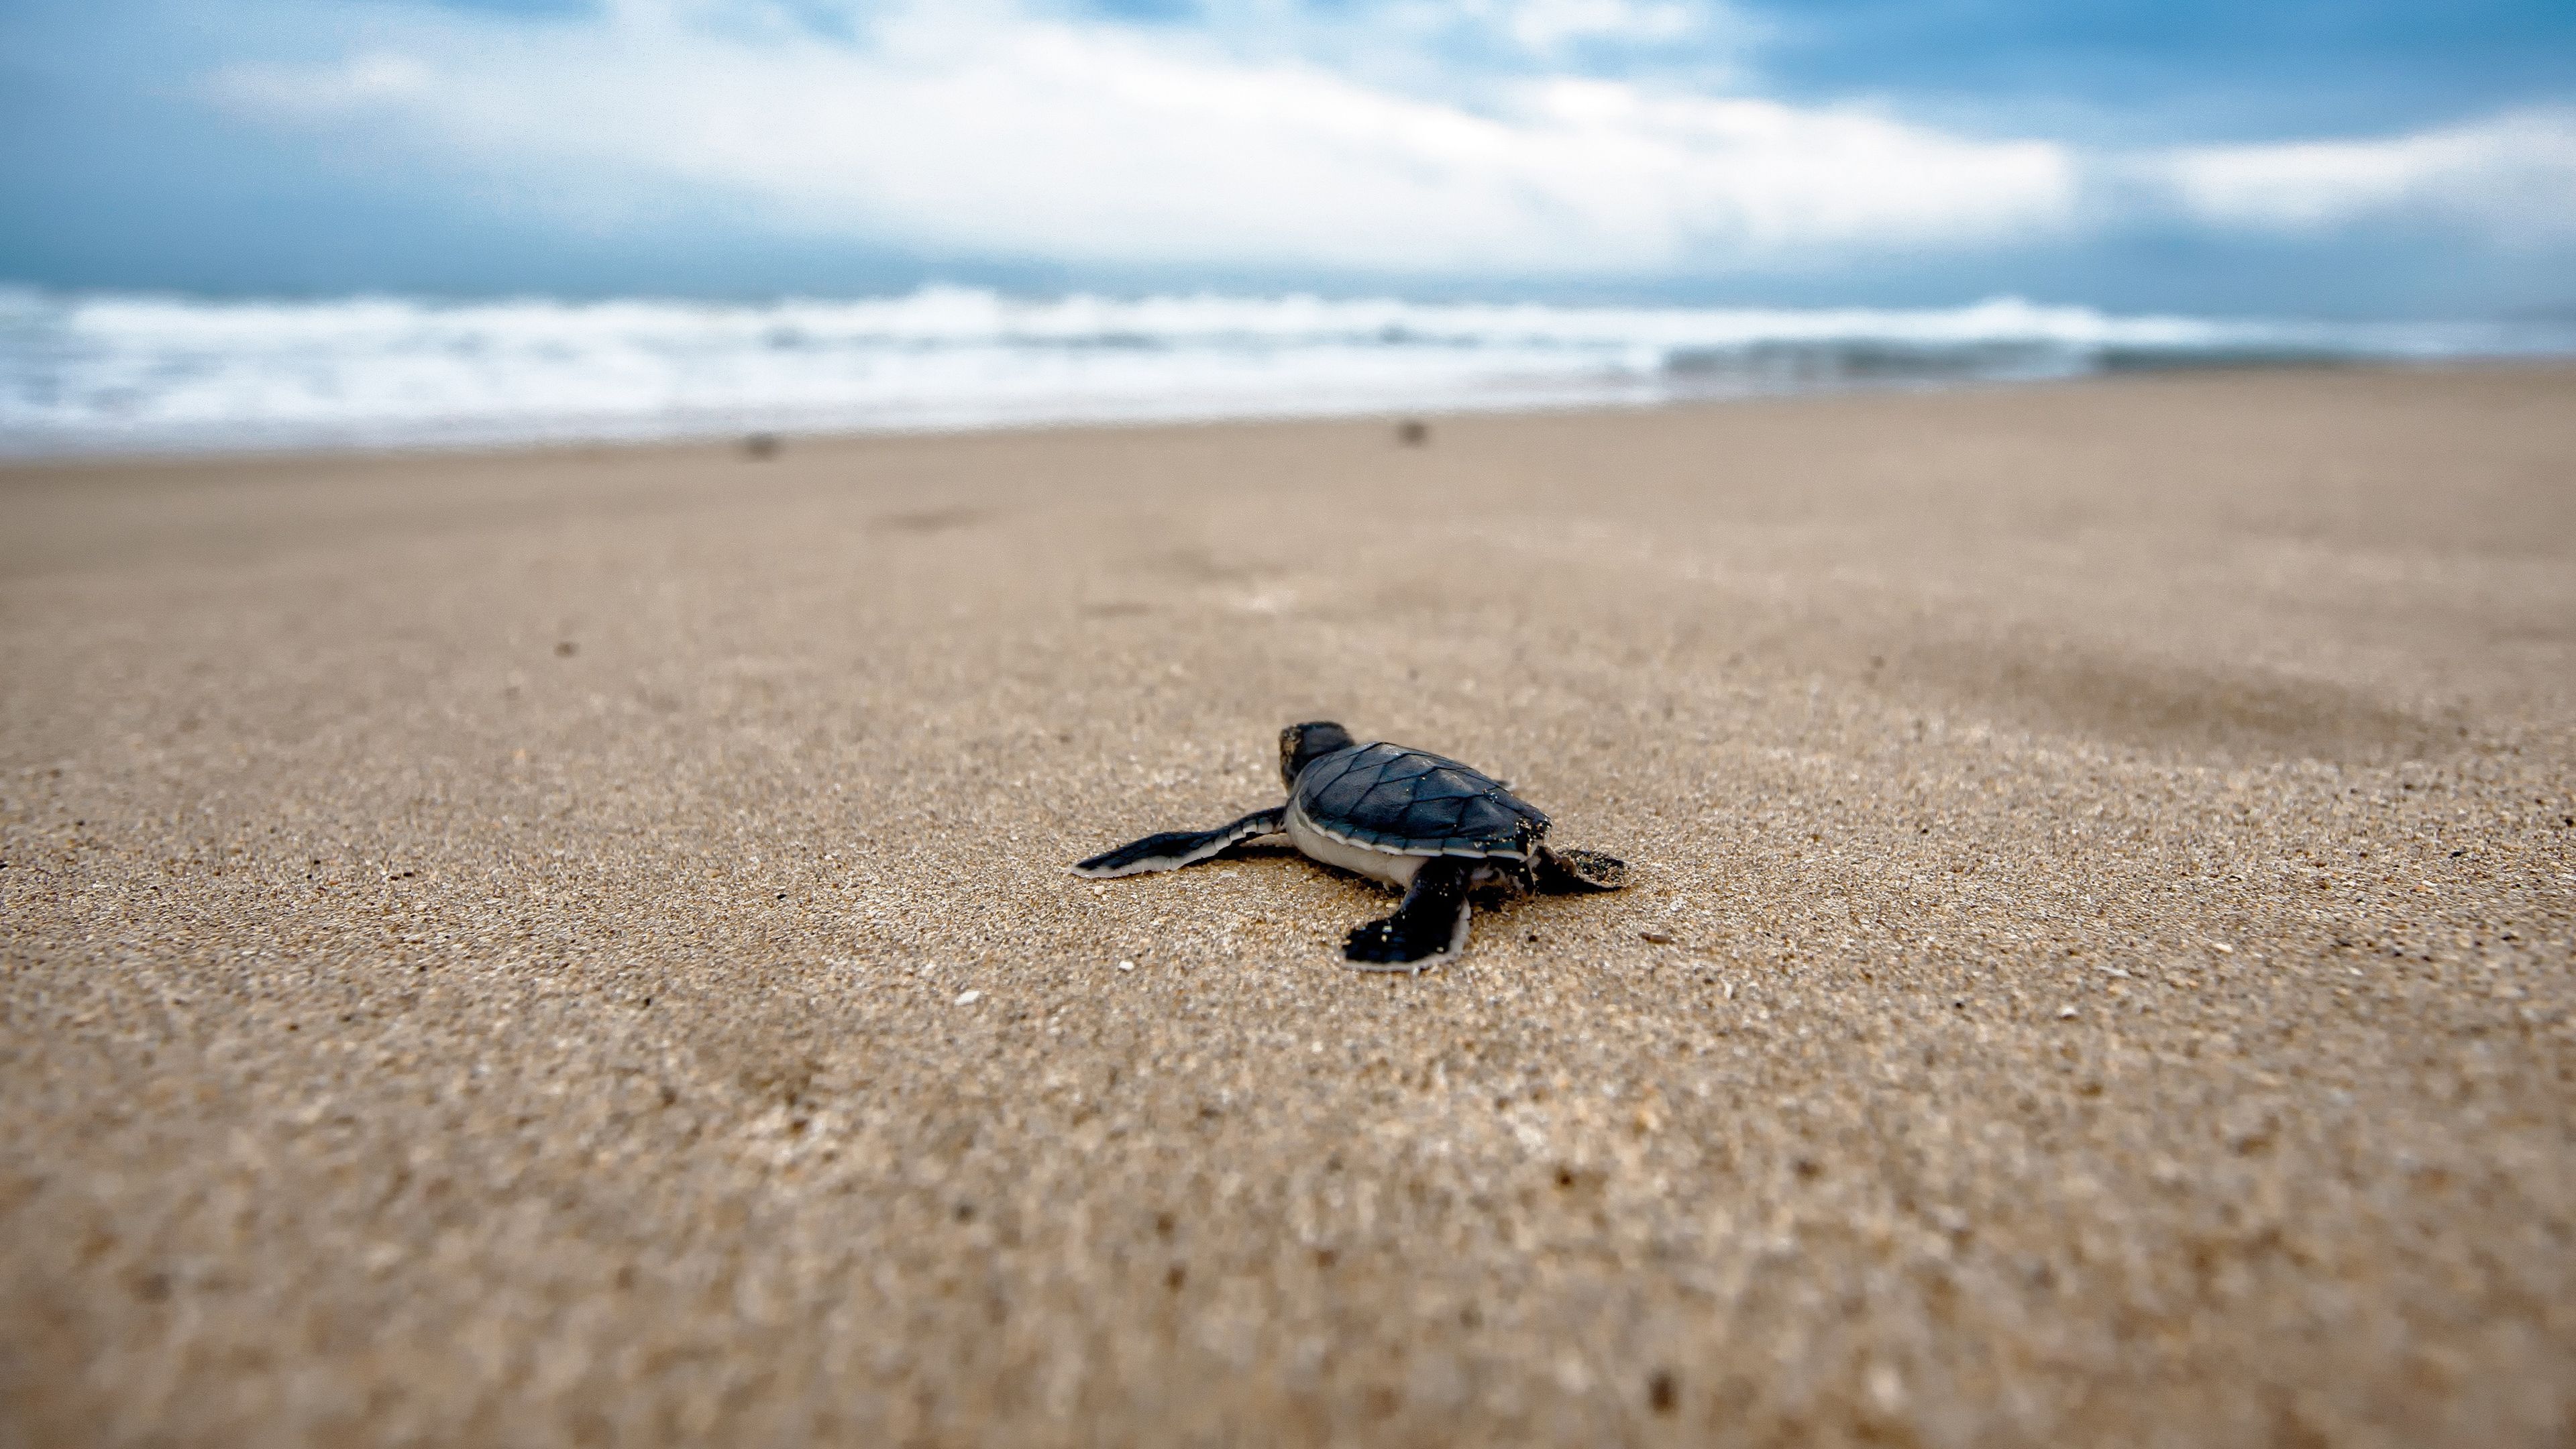 A baby turtle on the beach - Sea turtle, turtle